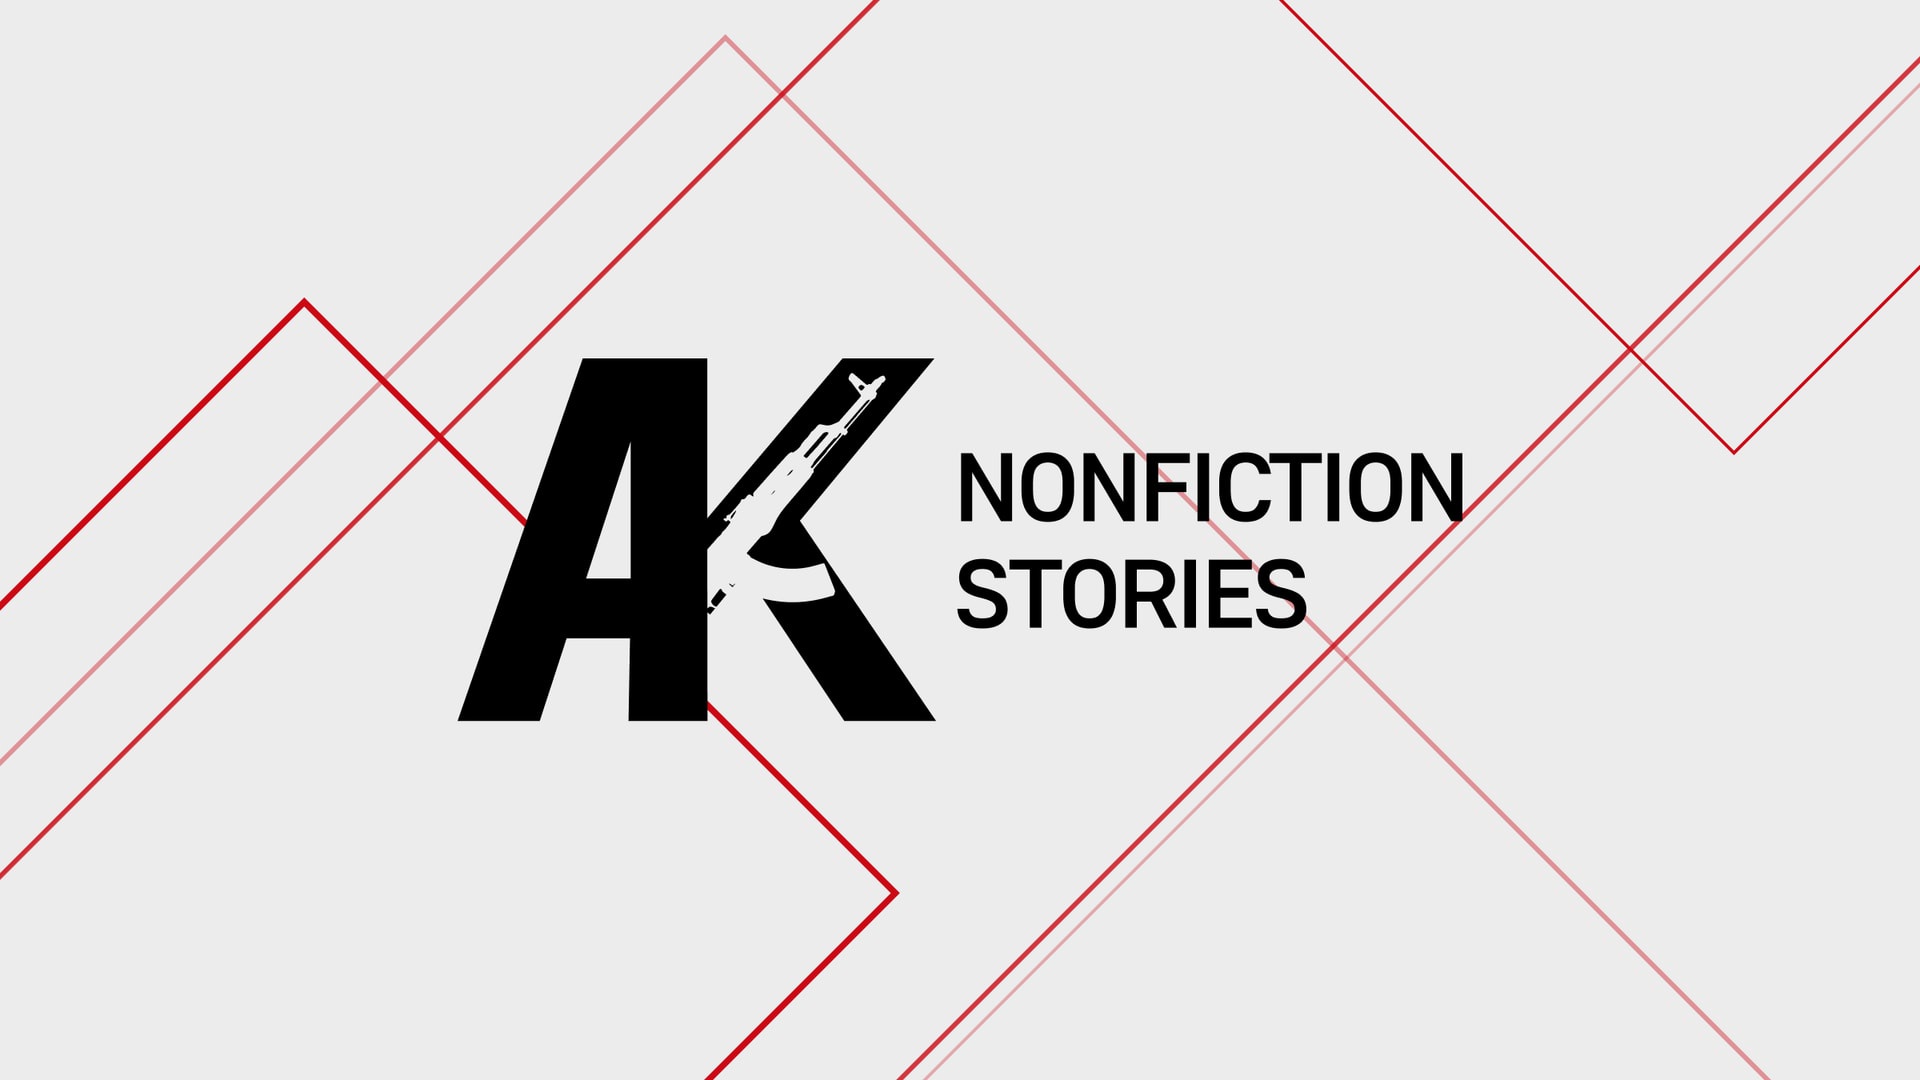 Sergey Sharapov in the AK: Nonfiction Stories